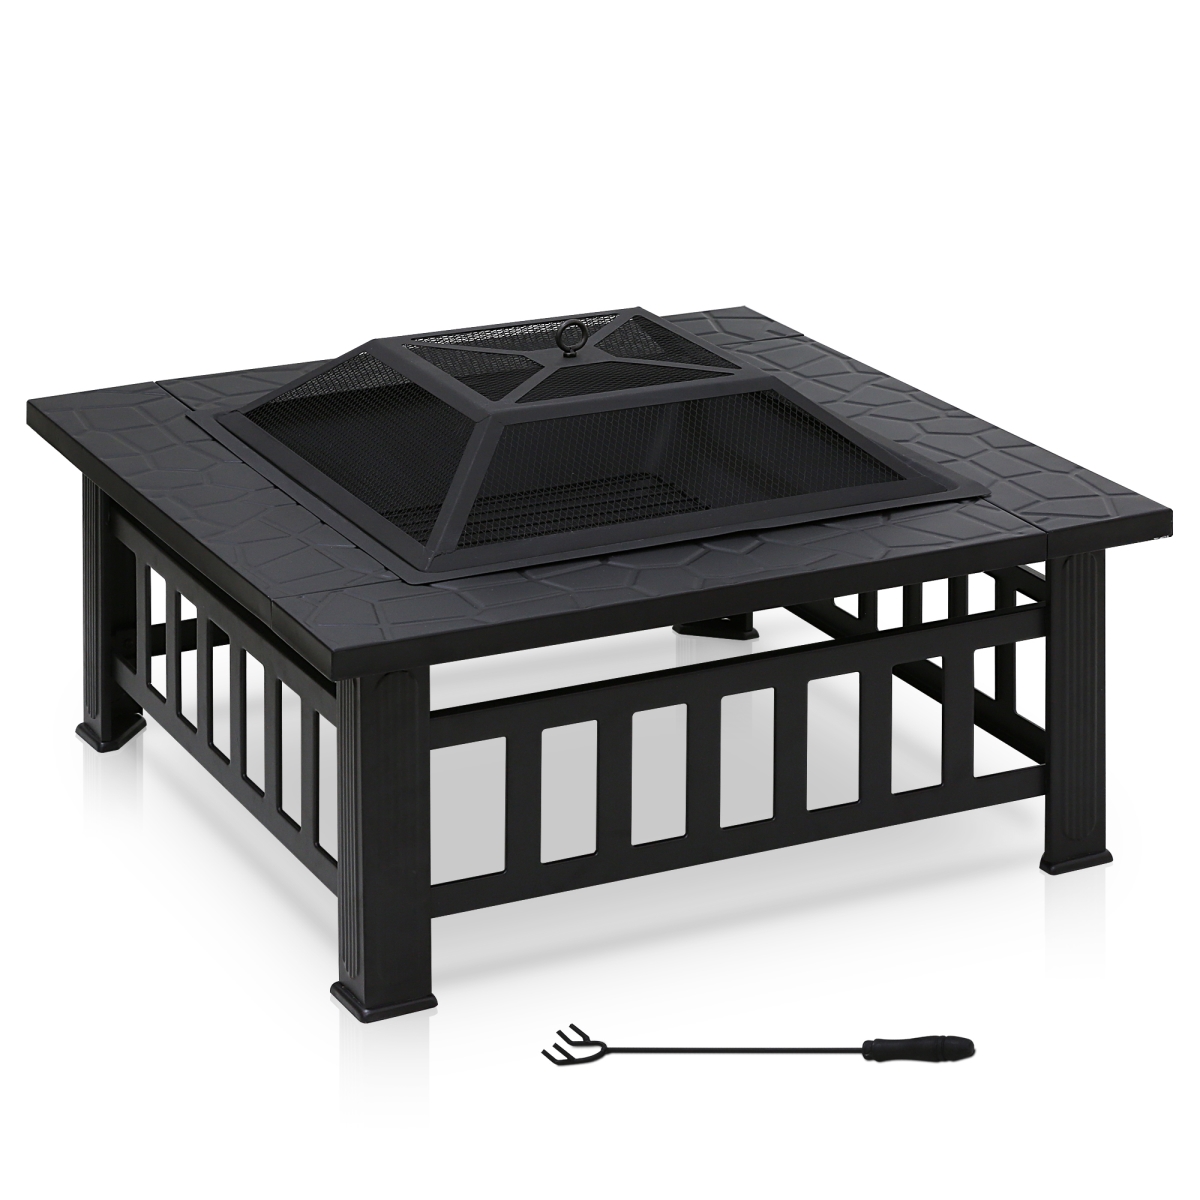 Outdoor Square Fire Pit, Black